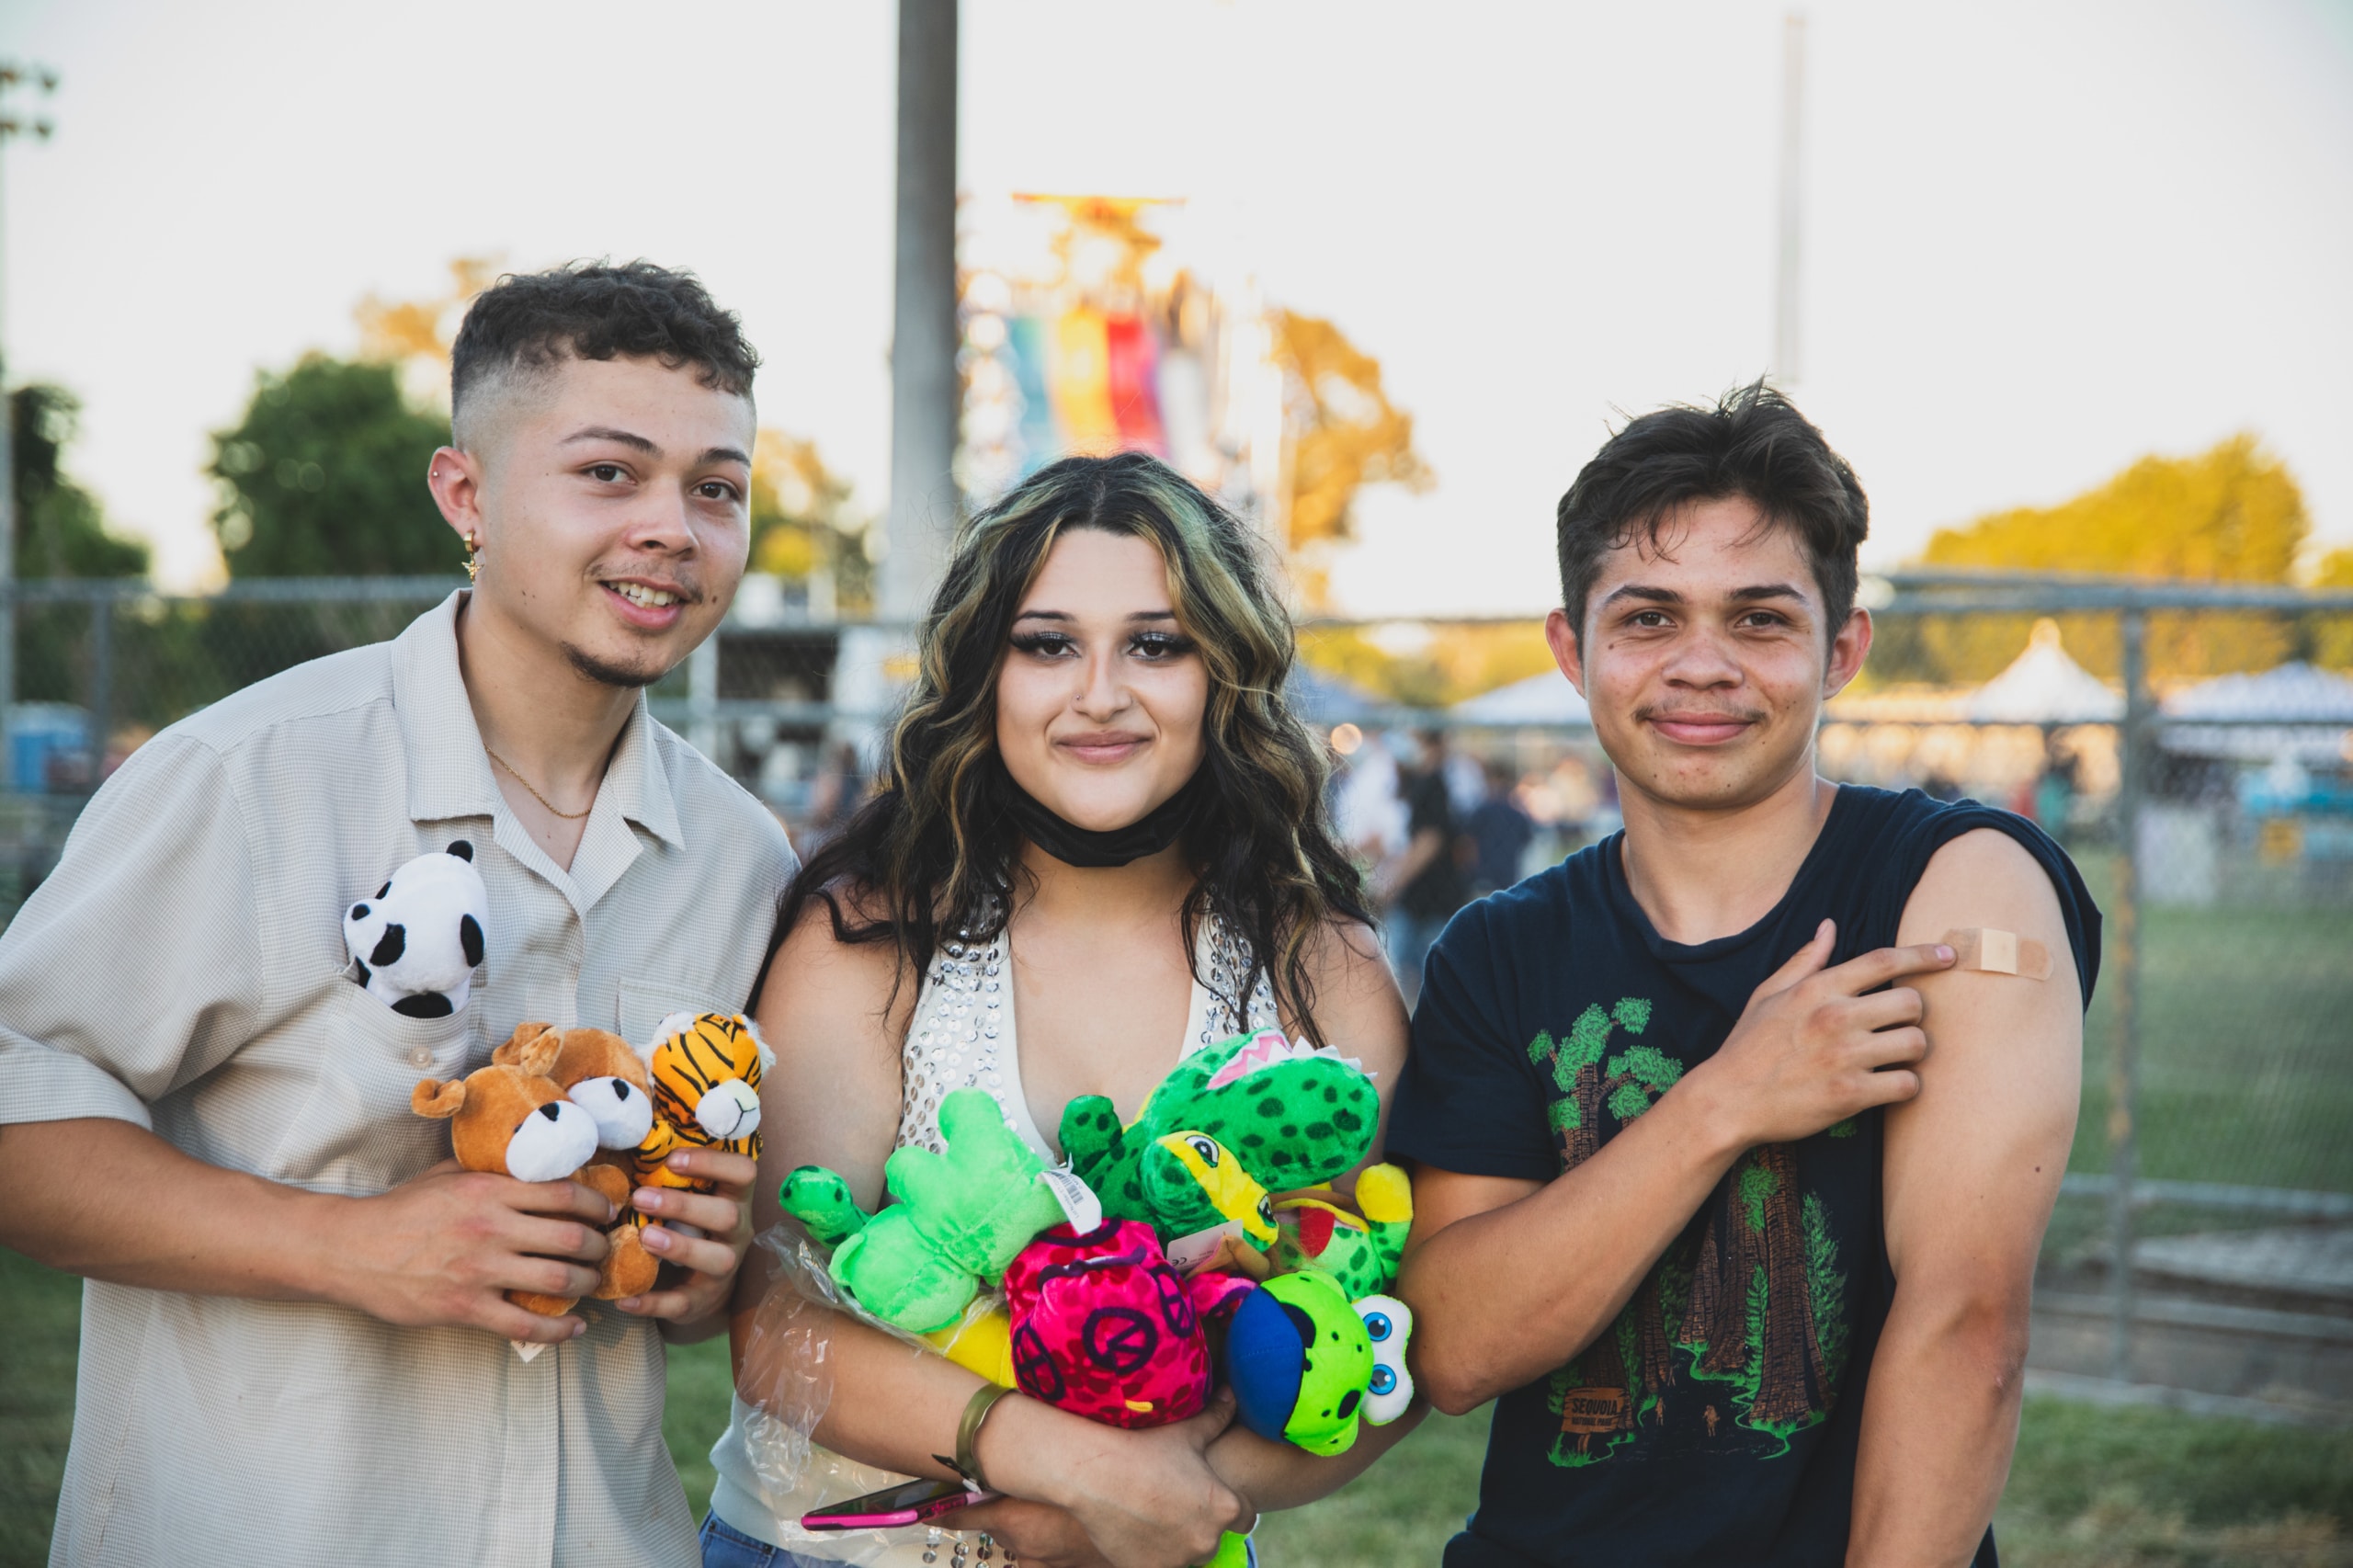 Three people stand together smiling at a carnival. One proudly shows the bandaid on their recently vaccinated arm and the other two hold colorful prizes they won at the carnival. Two hold colorful stuffed animal prizes while the other lifts their shirt sleeve to show a bandage from a recently administered vaccine shot.